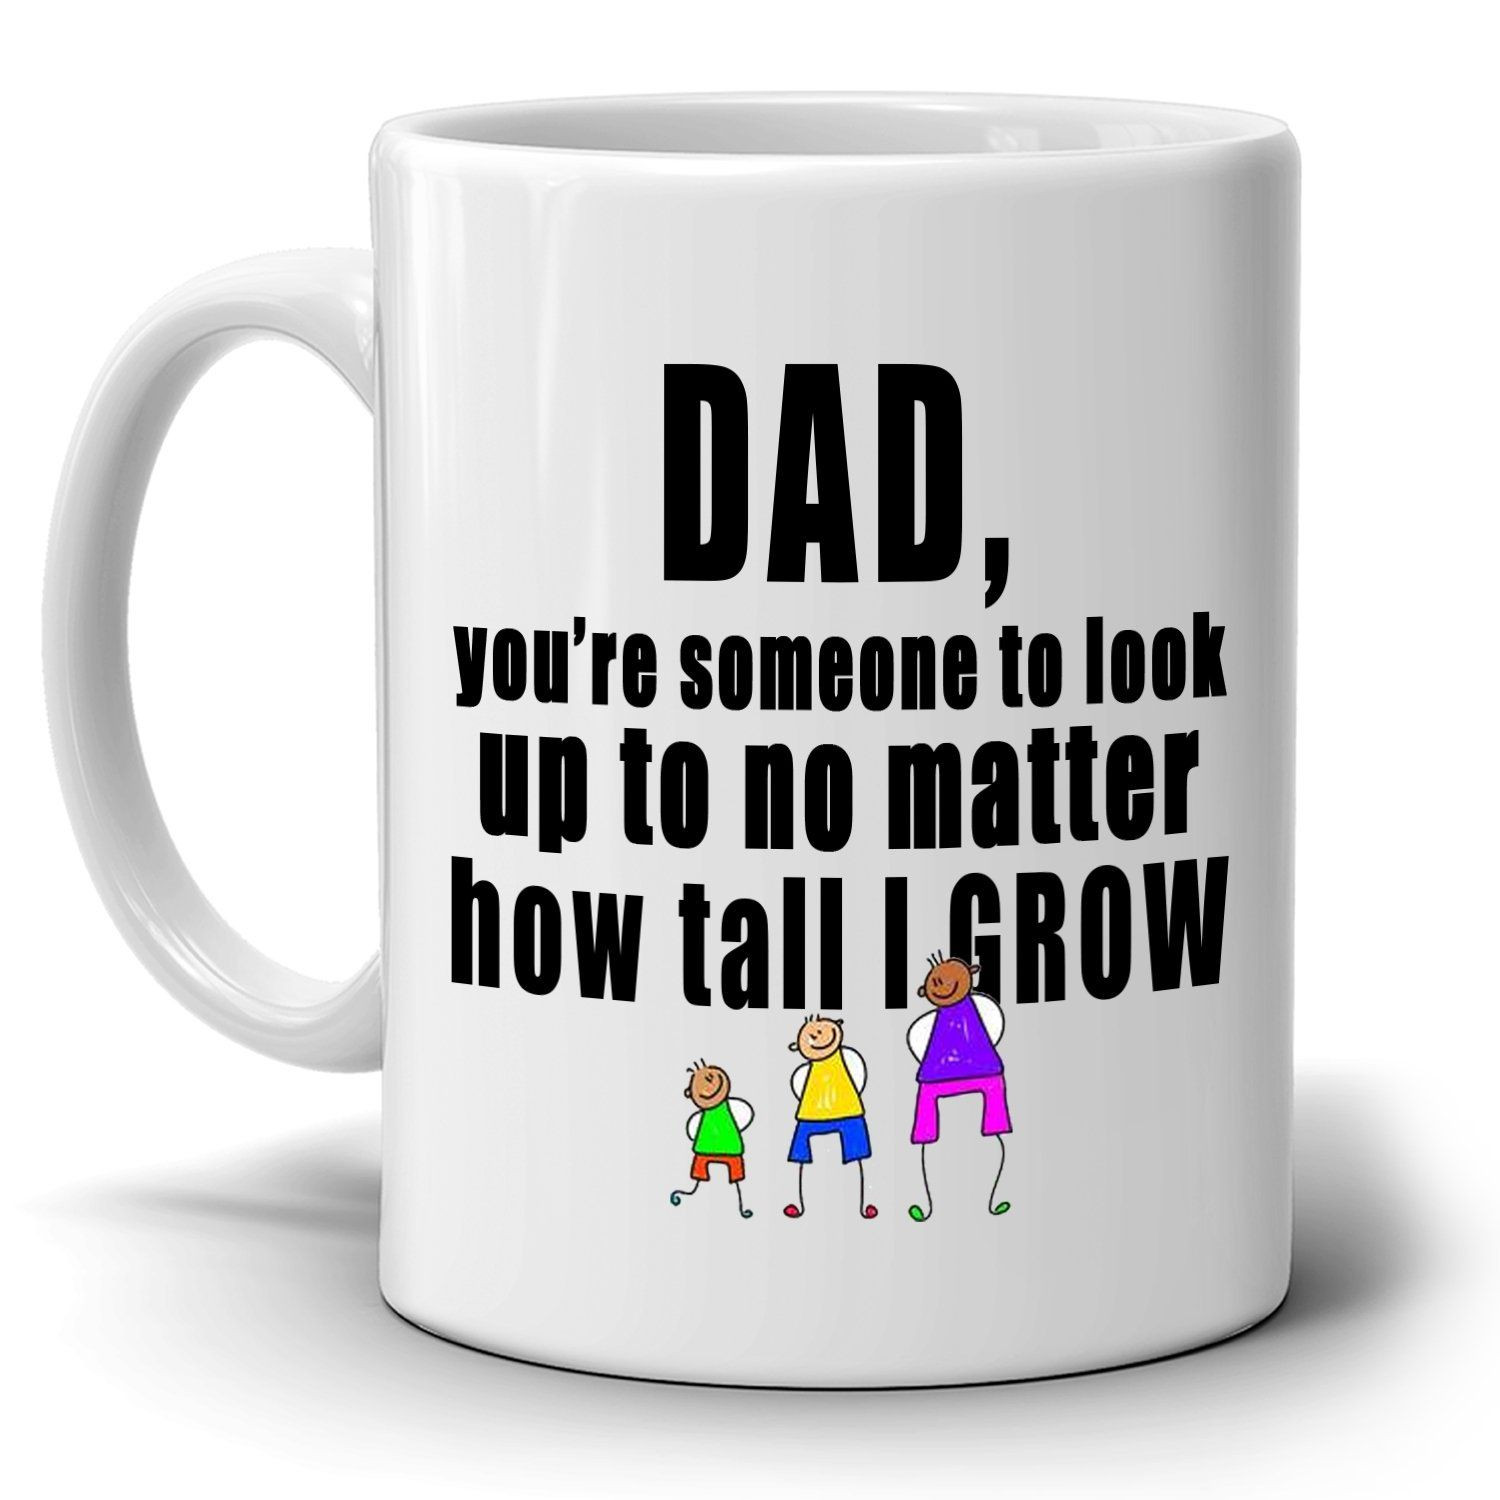 Father And Son Gift Ideas
 Inspirational Father Father Daughter and Son Gifts Ideas